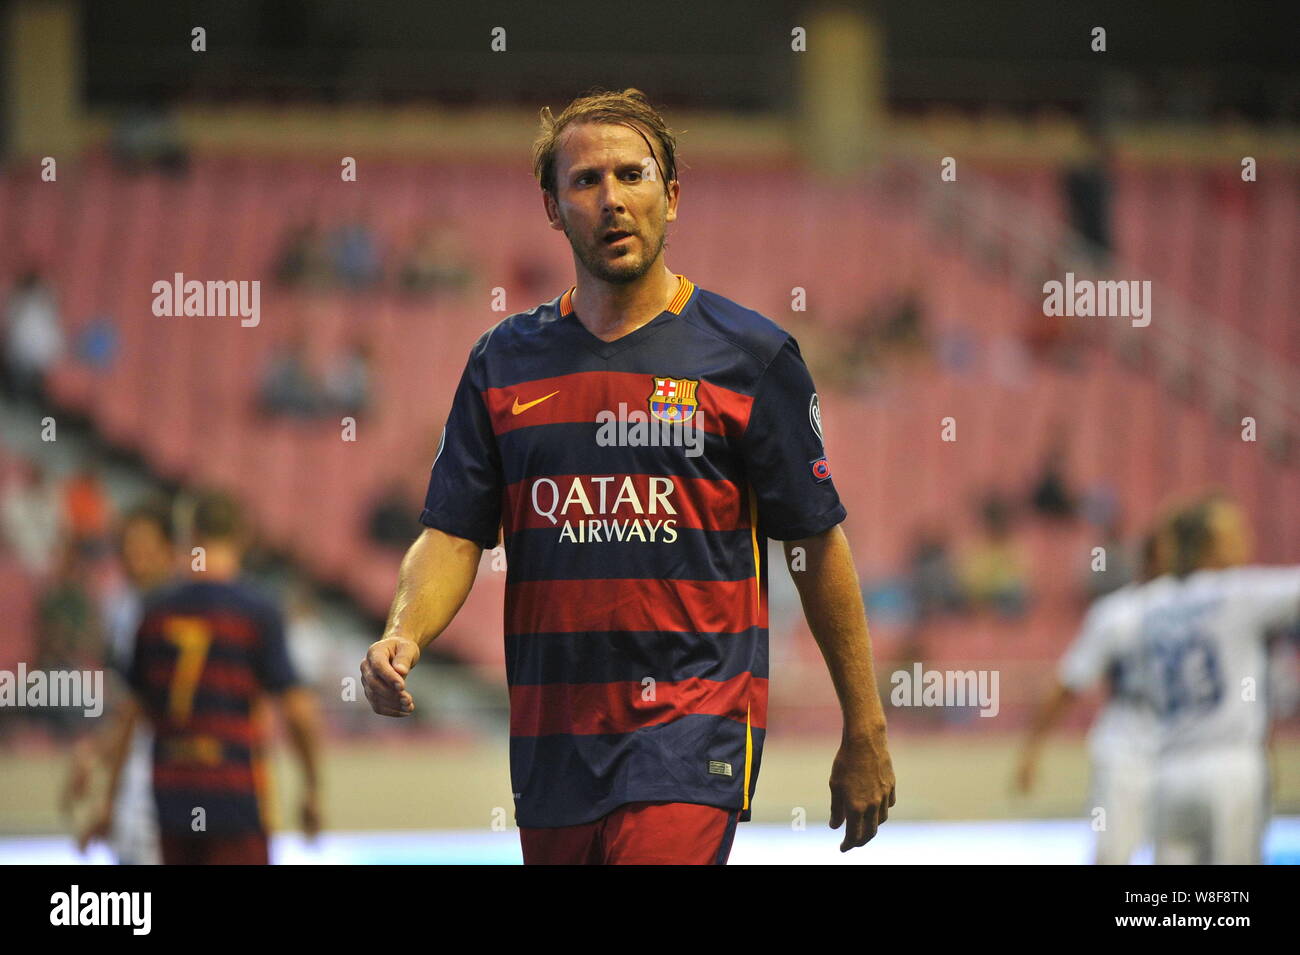 Gaizka Mendieta of FPBarcelona Players is pictured in a soccer match against Inter Forever during the 2015 Winning League International Legend's Champ Stock Photo